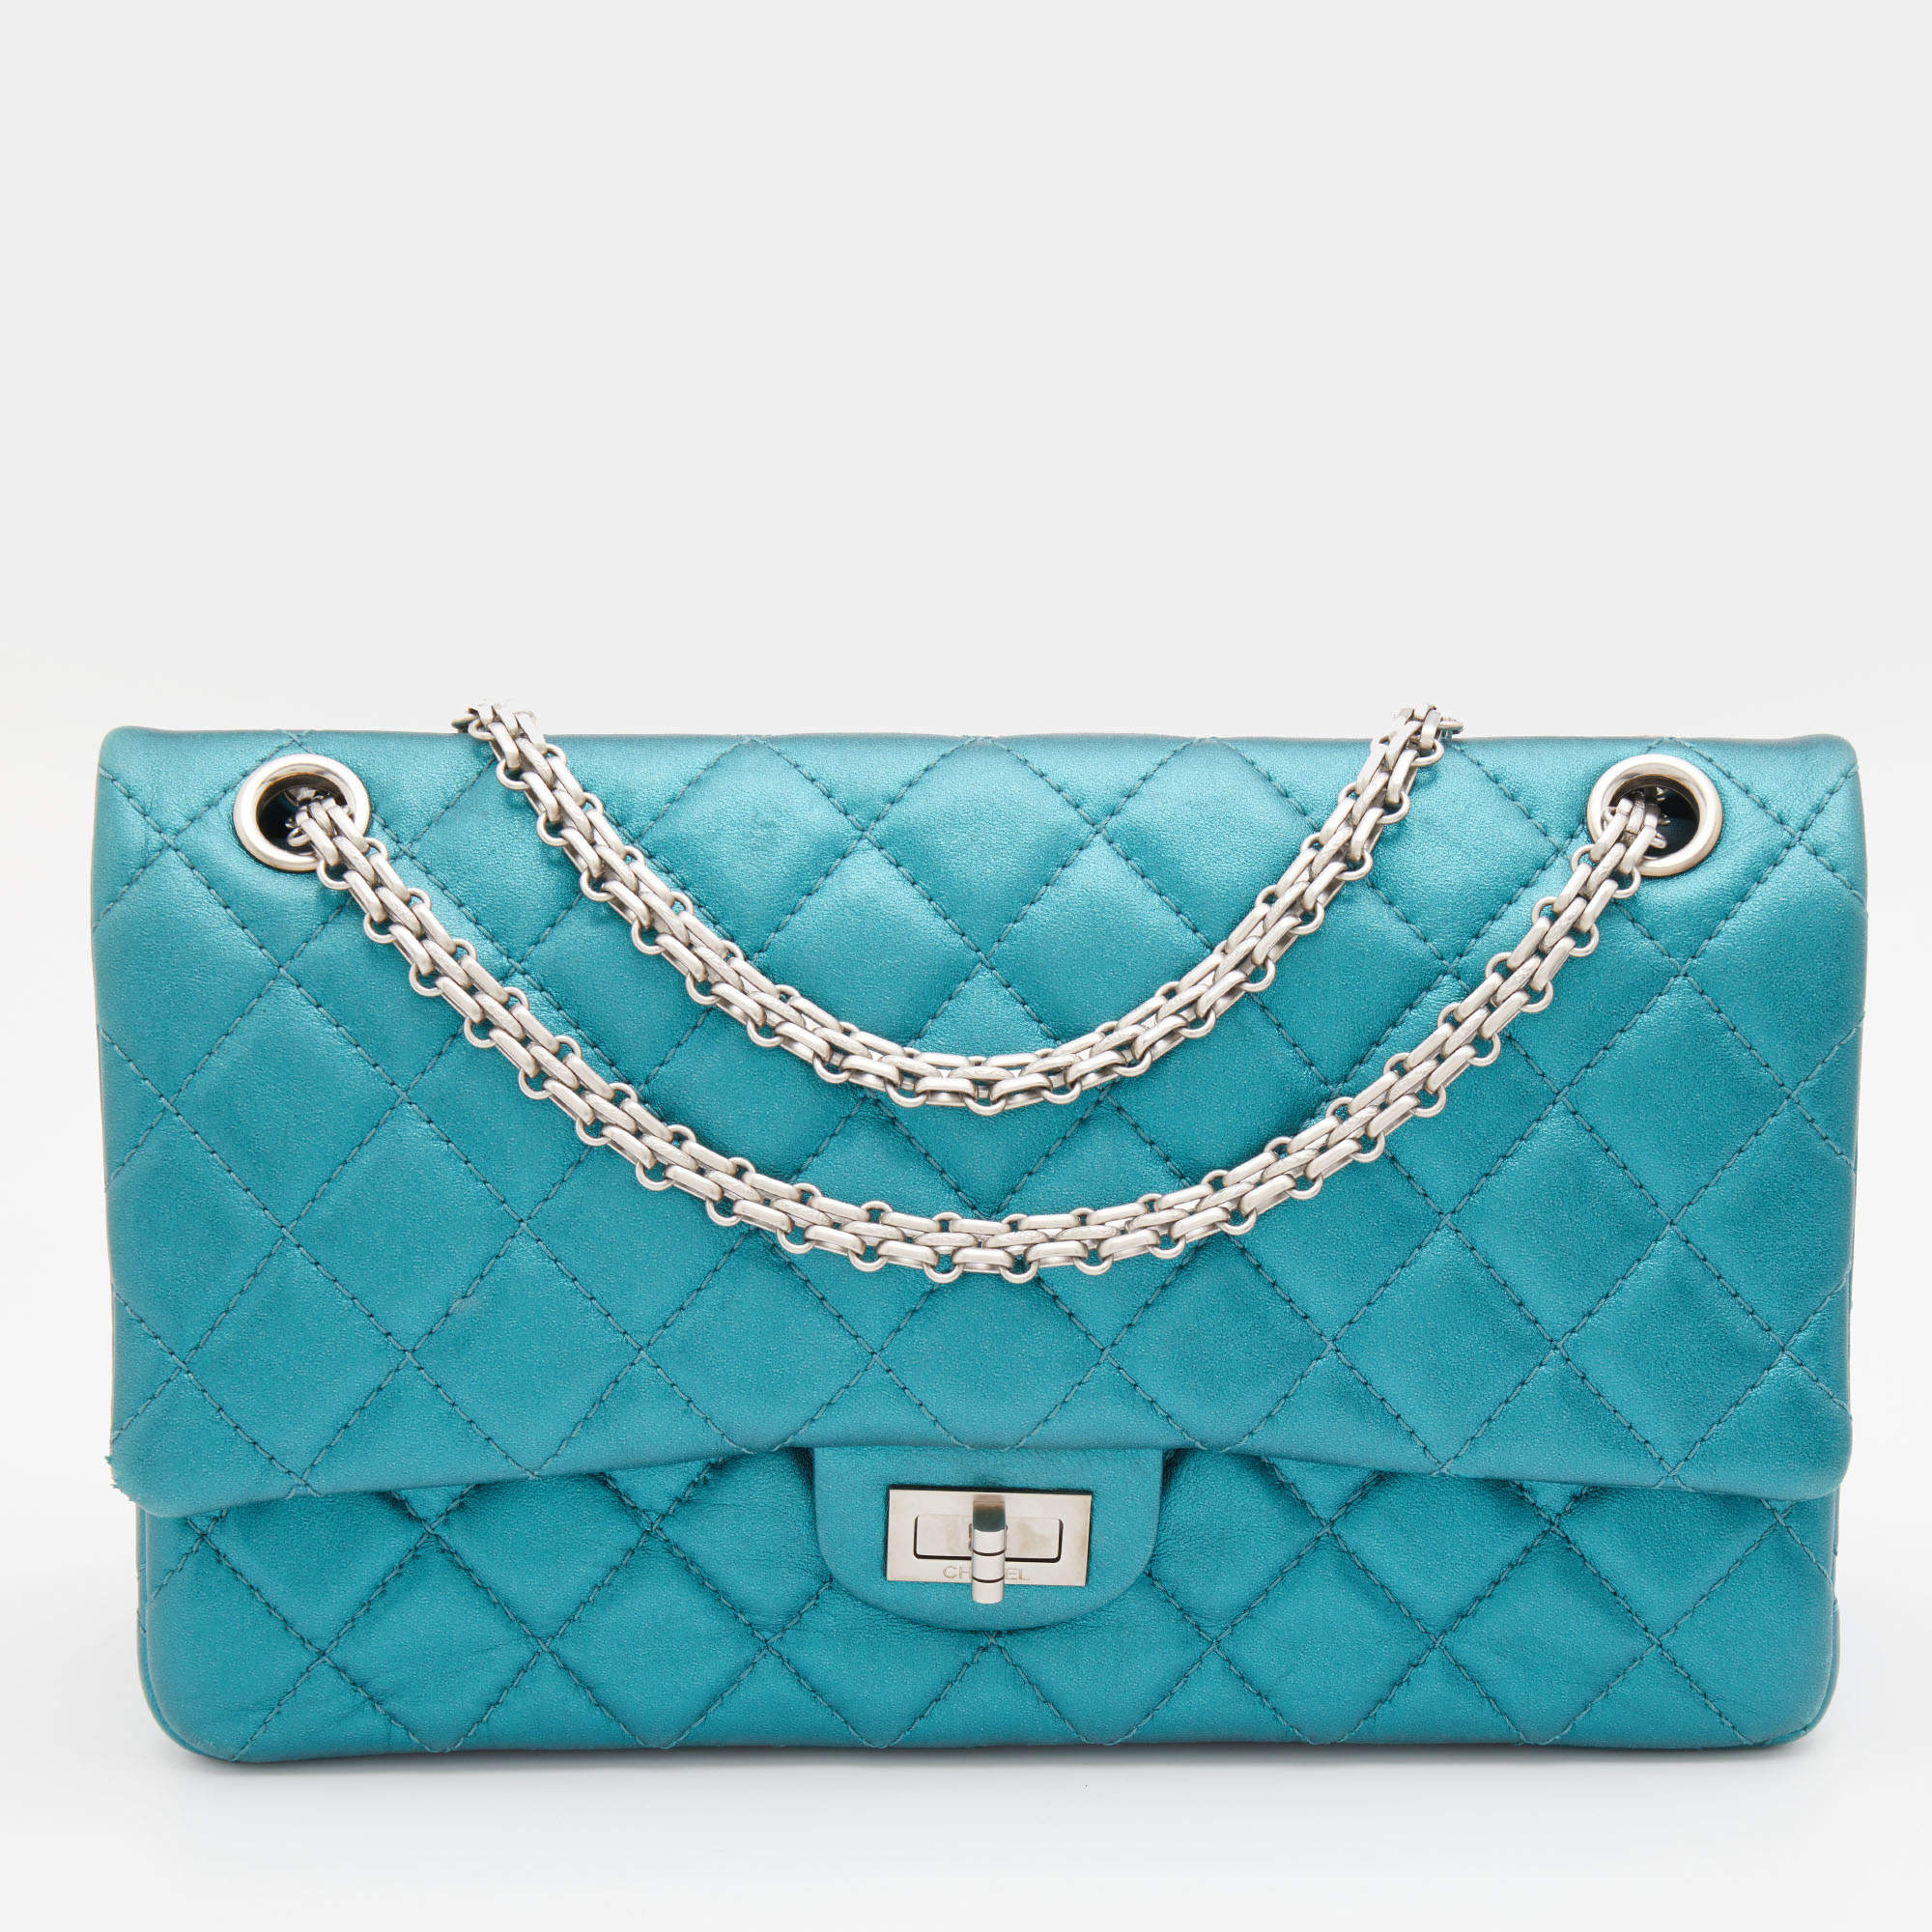 Chanel Metallic Teal Blue Quilted Leather Reissue 2.55 Classic 226 Flap ...